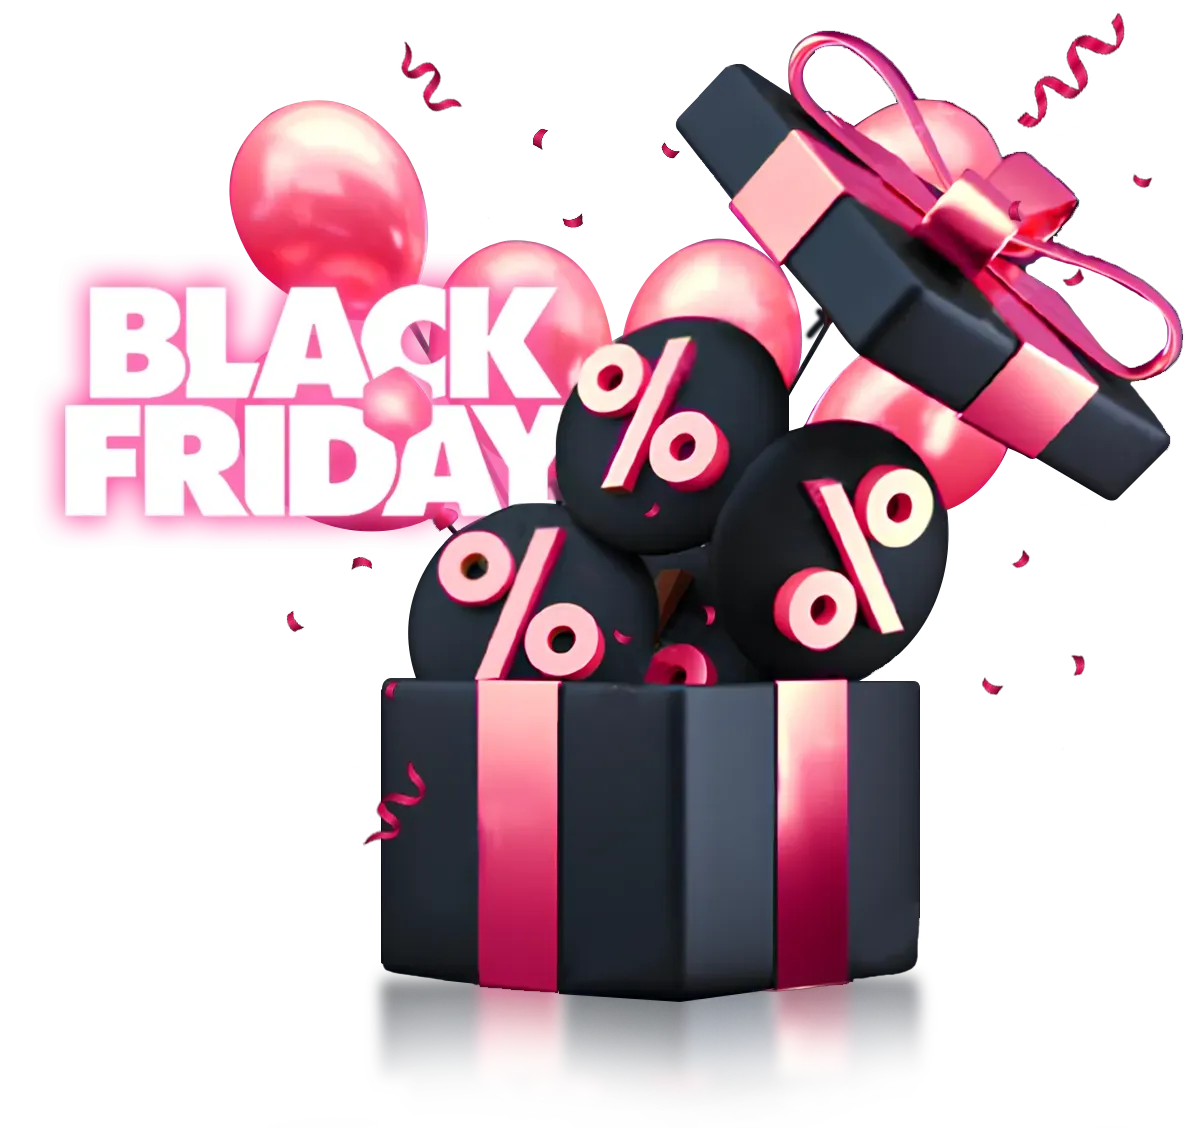 Unbeatable Black Friday Deals from Groove Digital